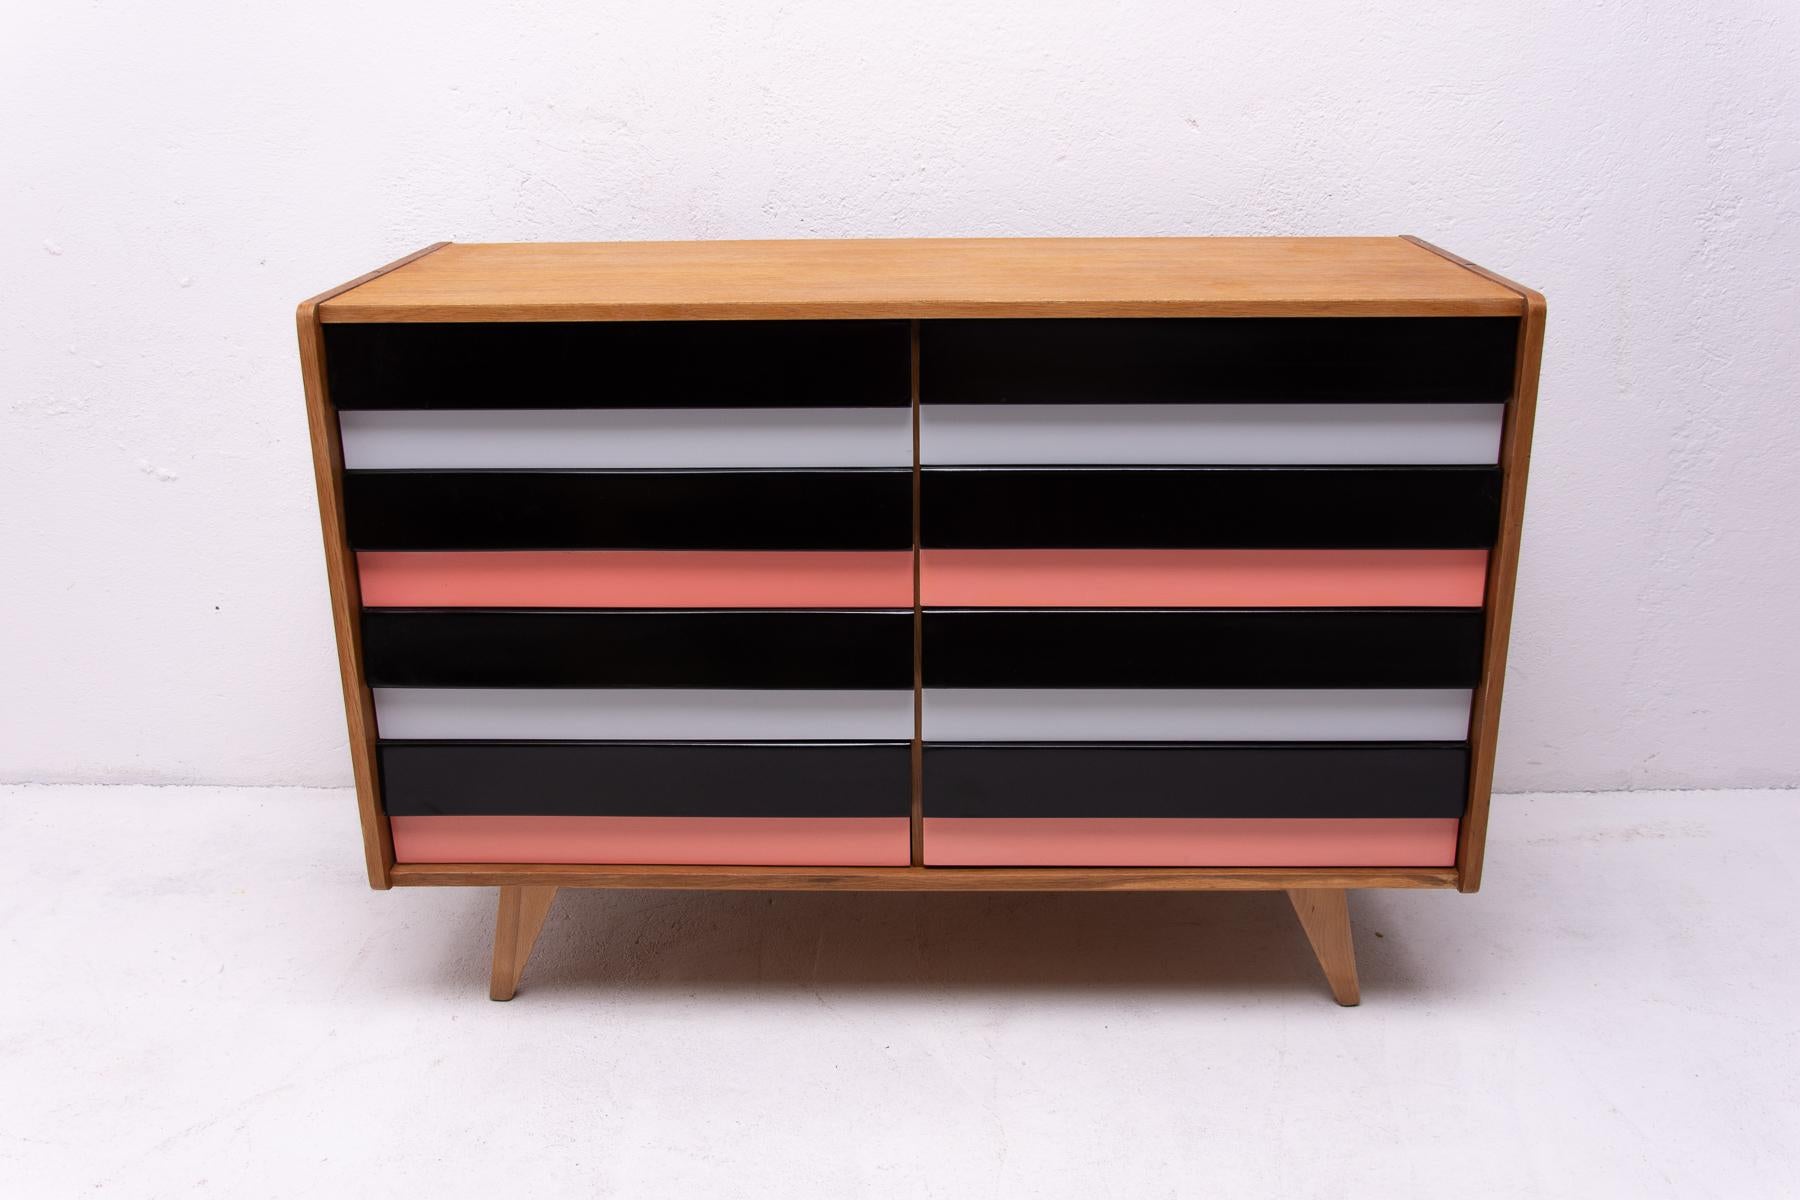 Modernist chest of drawers, model no. U-453, designed by Jirí Jiroutek for Interiér Praha. It was made in the former Czechoslovakia in the 1960s. This model is associated with the world-famous EXPO 58 in Brussels. It features beechwood, plywood,